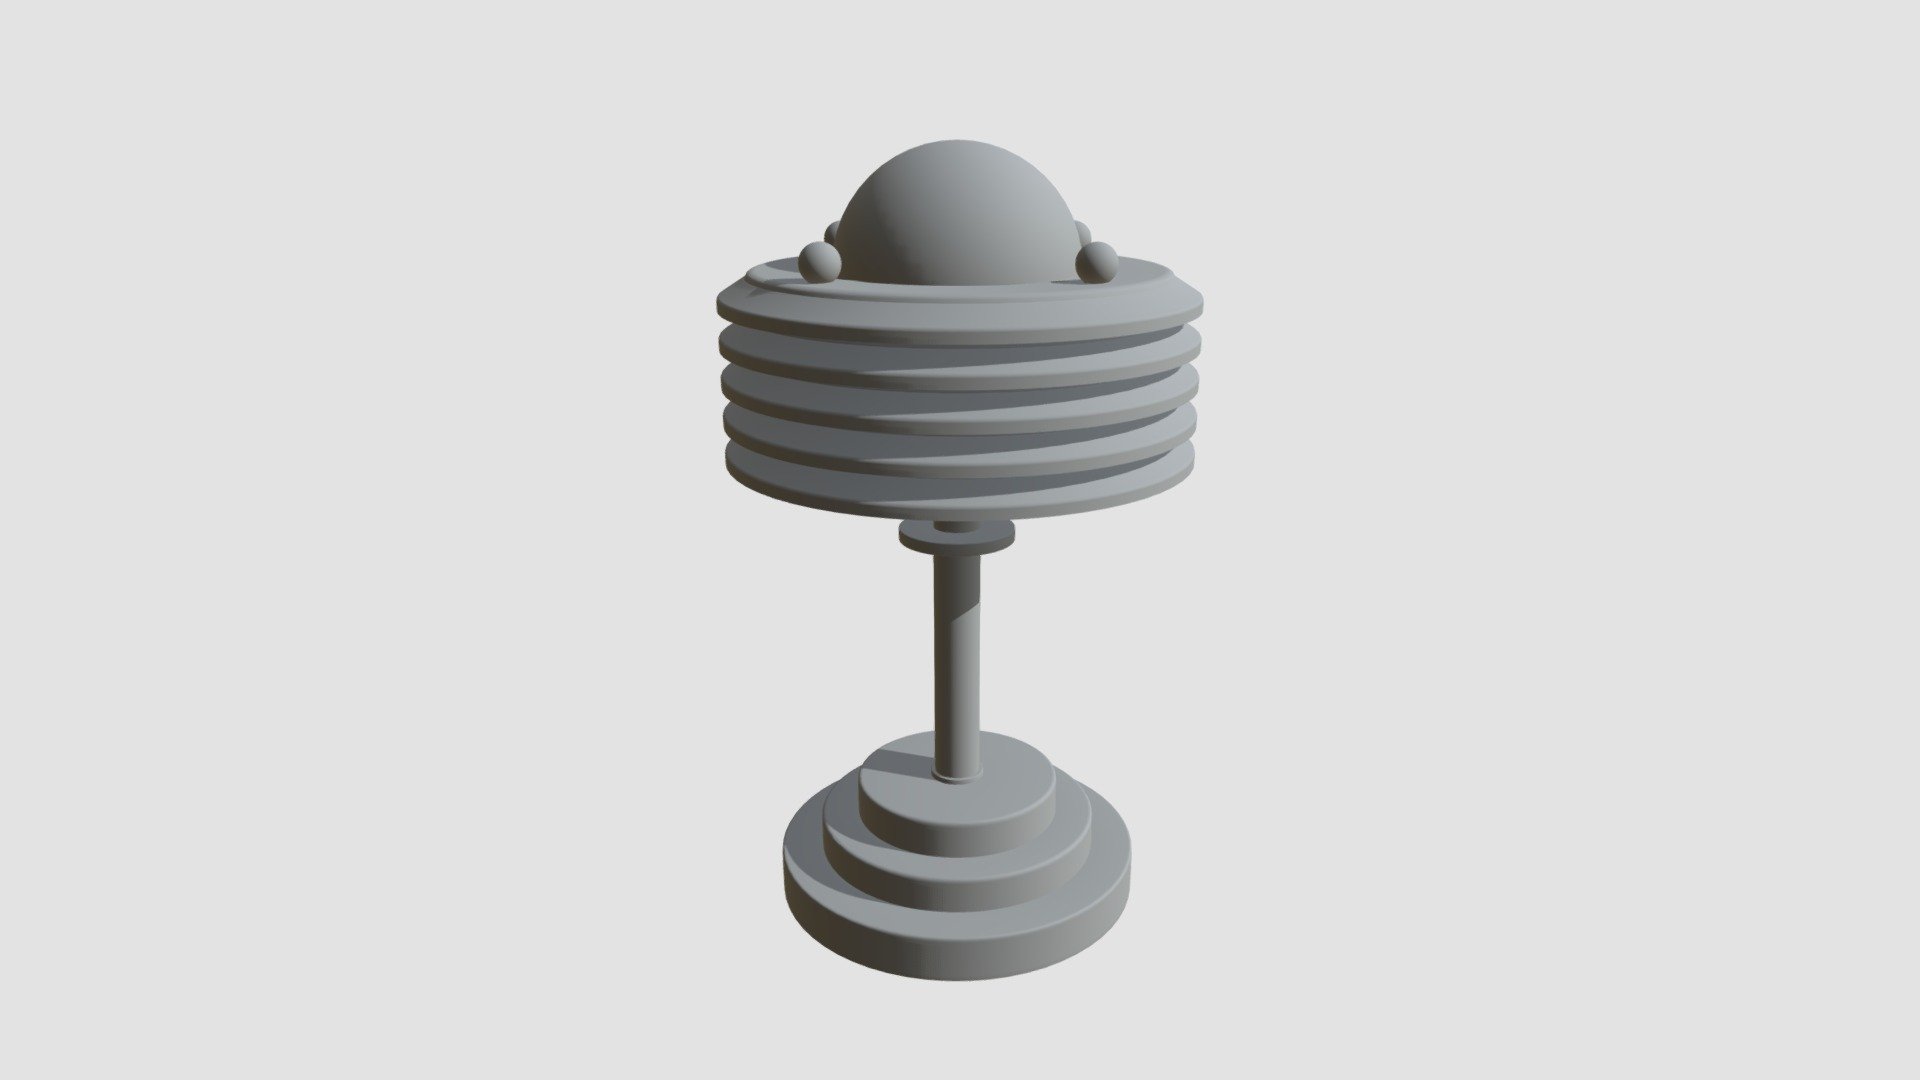 Highly detailed 3d model of lamp with all textures, shaders and materials. It is ready to use, just put it into your scene 3d model